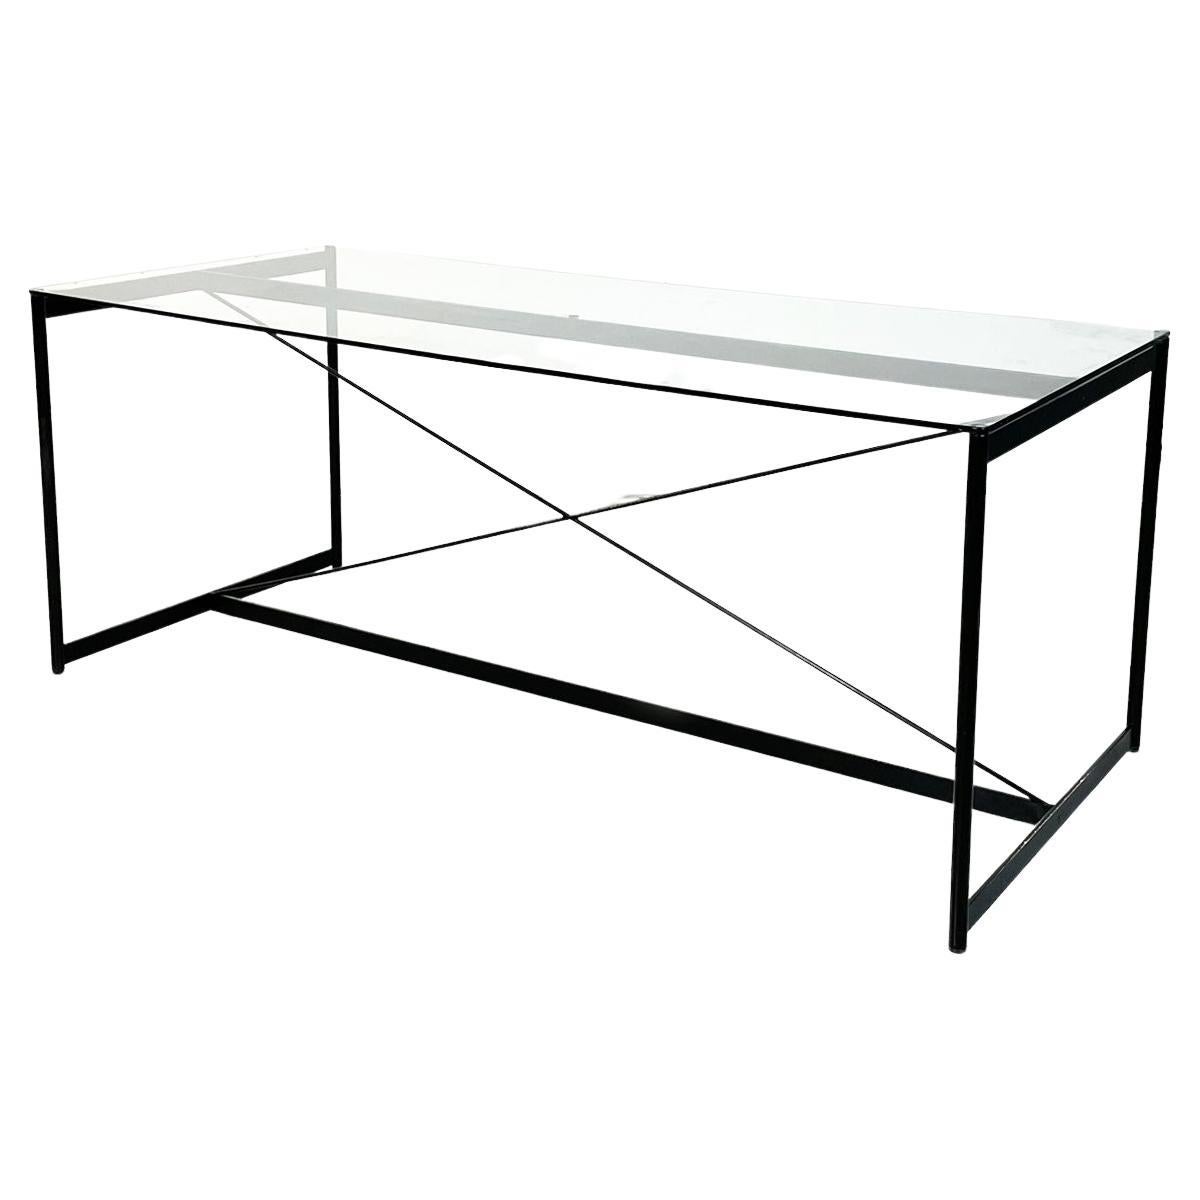 Italian Bauhaus Modern Dining Table Asnago by Mario Asnago for Pallucco, 1990s For Sale